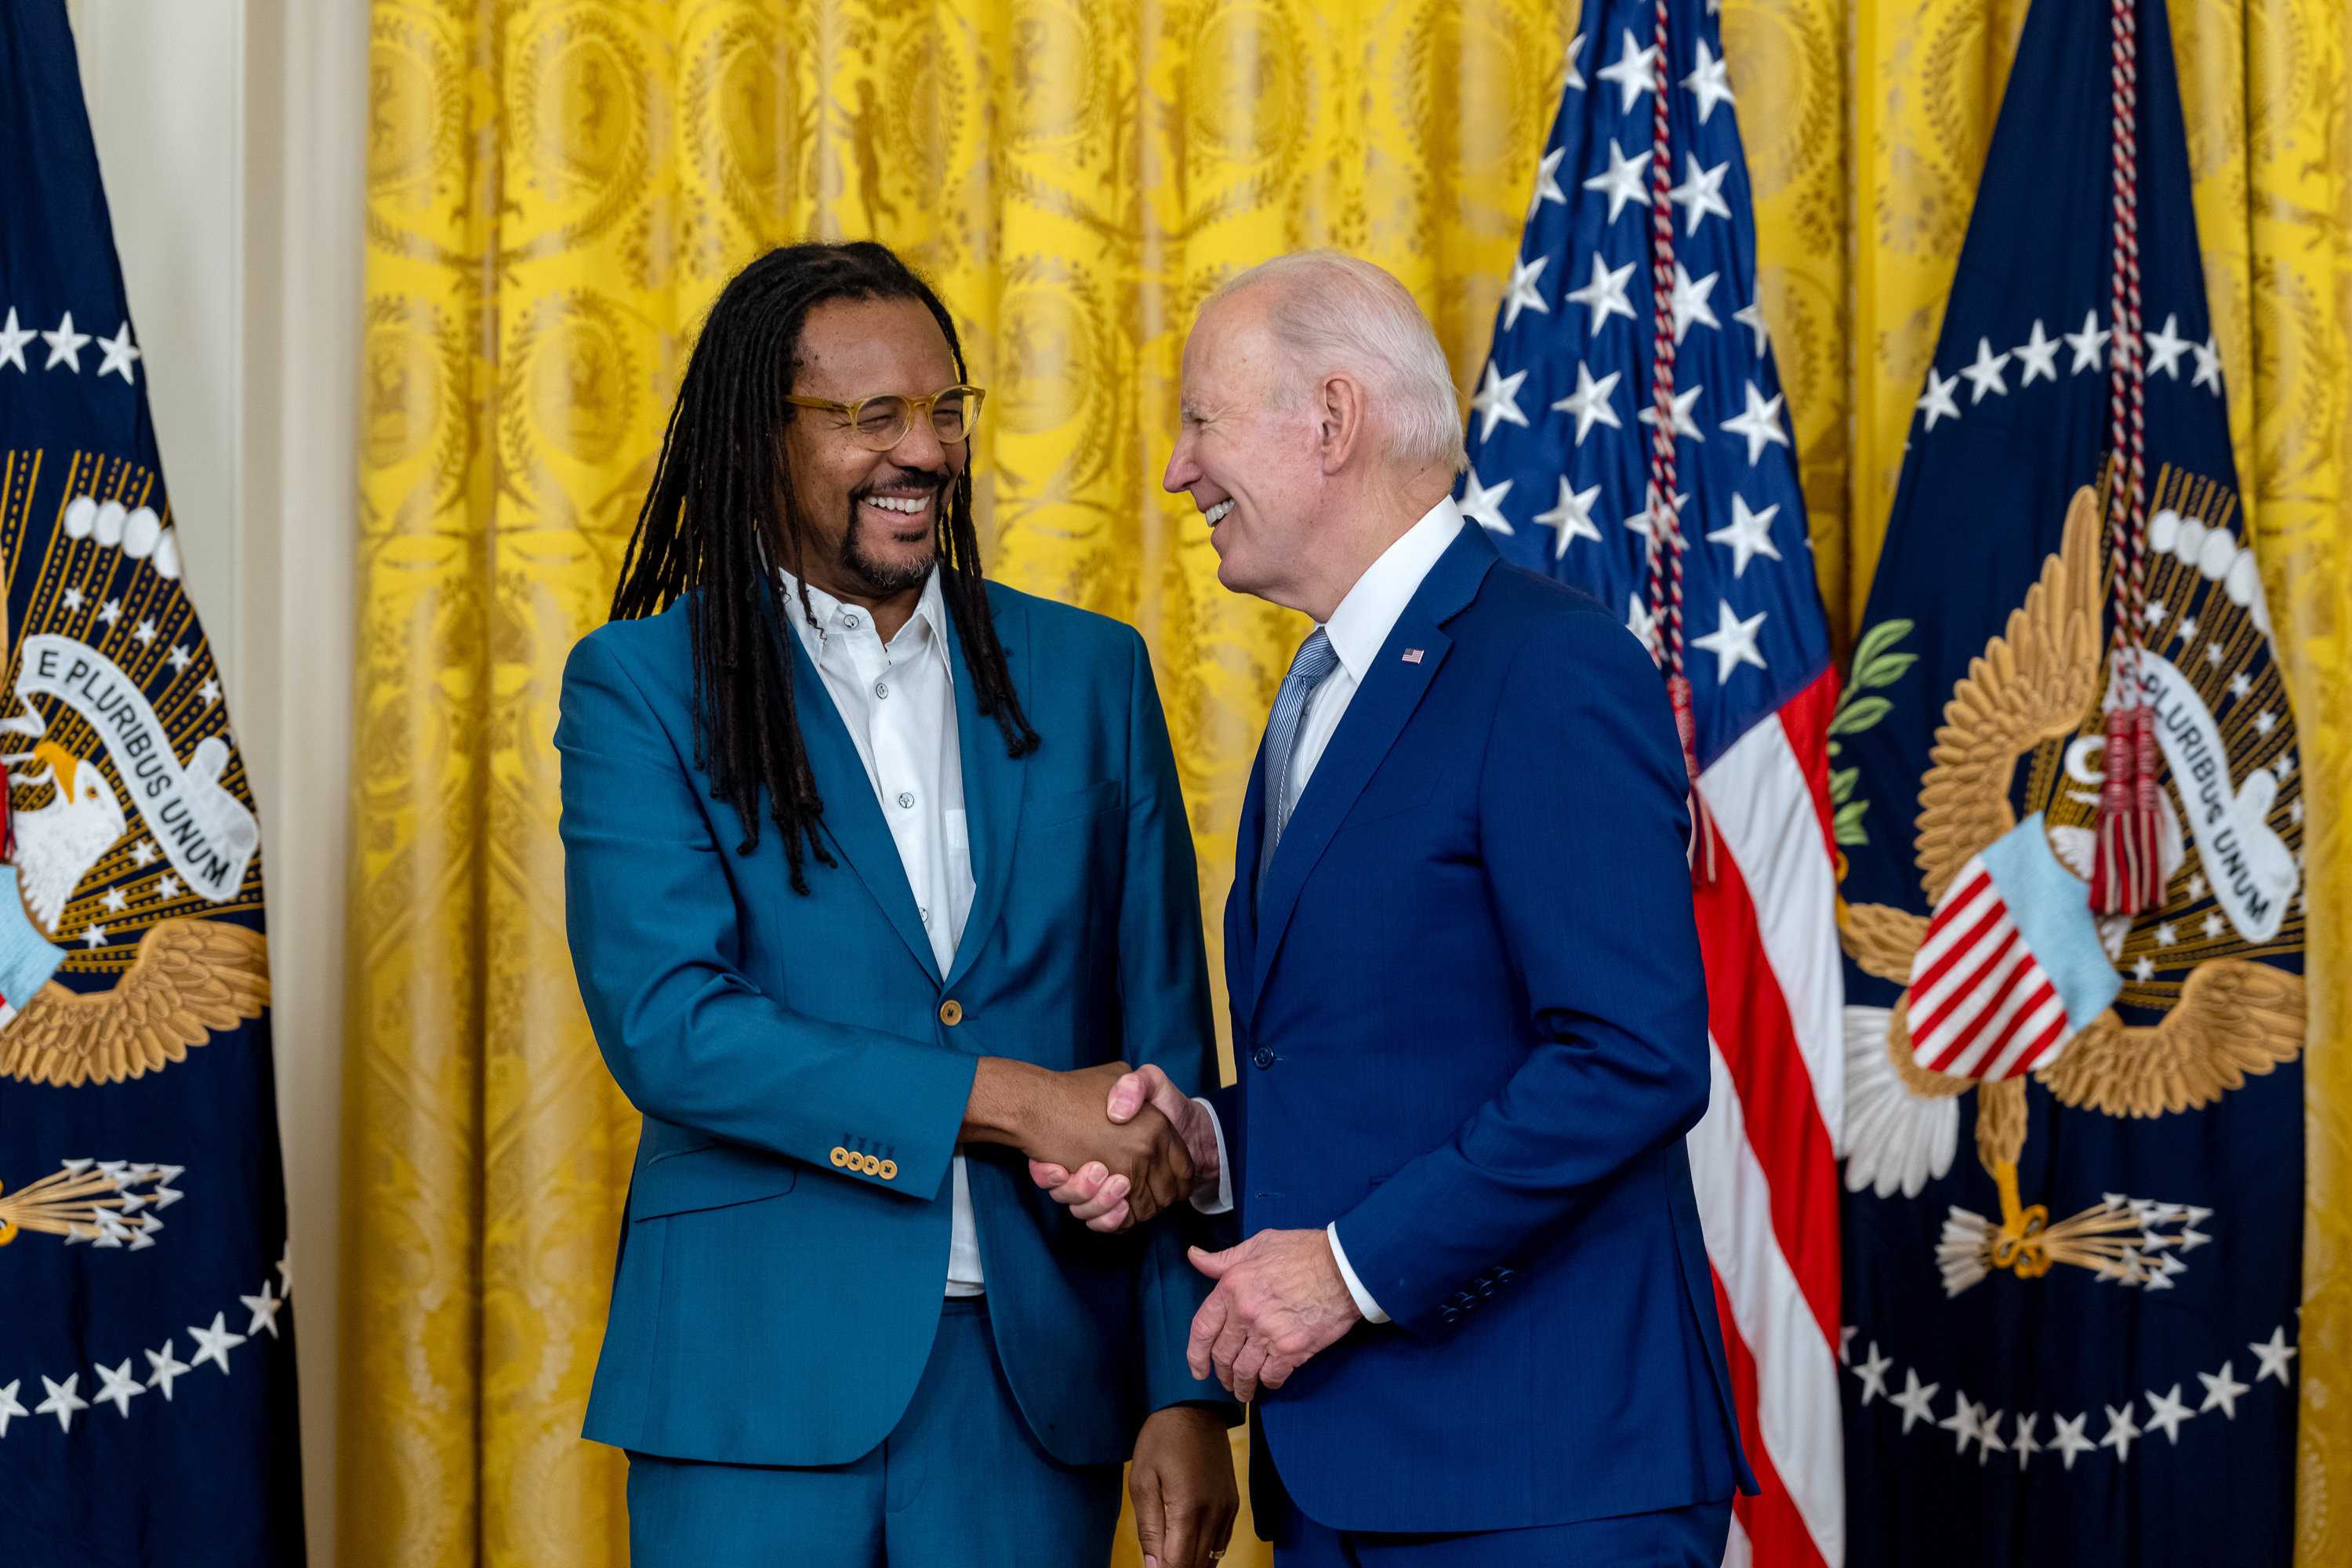 Colson Whitehead and President Joe Biden shake hands in front large gold curtan and american flags.